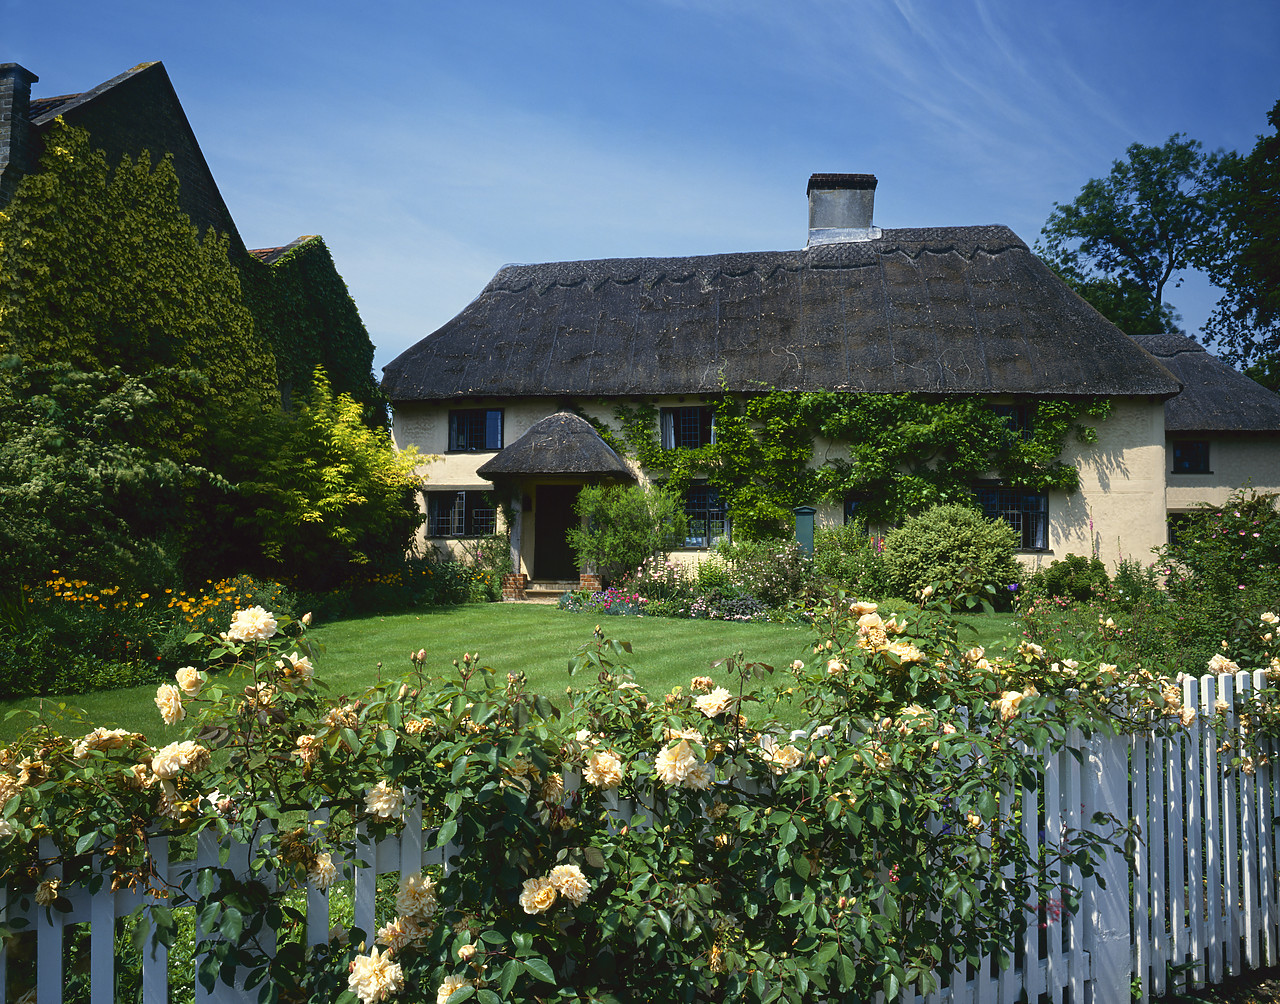 #892245-1 - Thatched Cottage & Roses, East Soham, Suffolk, England